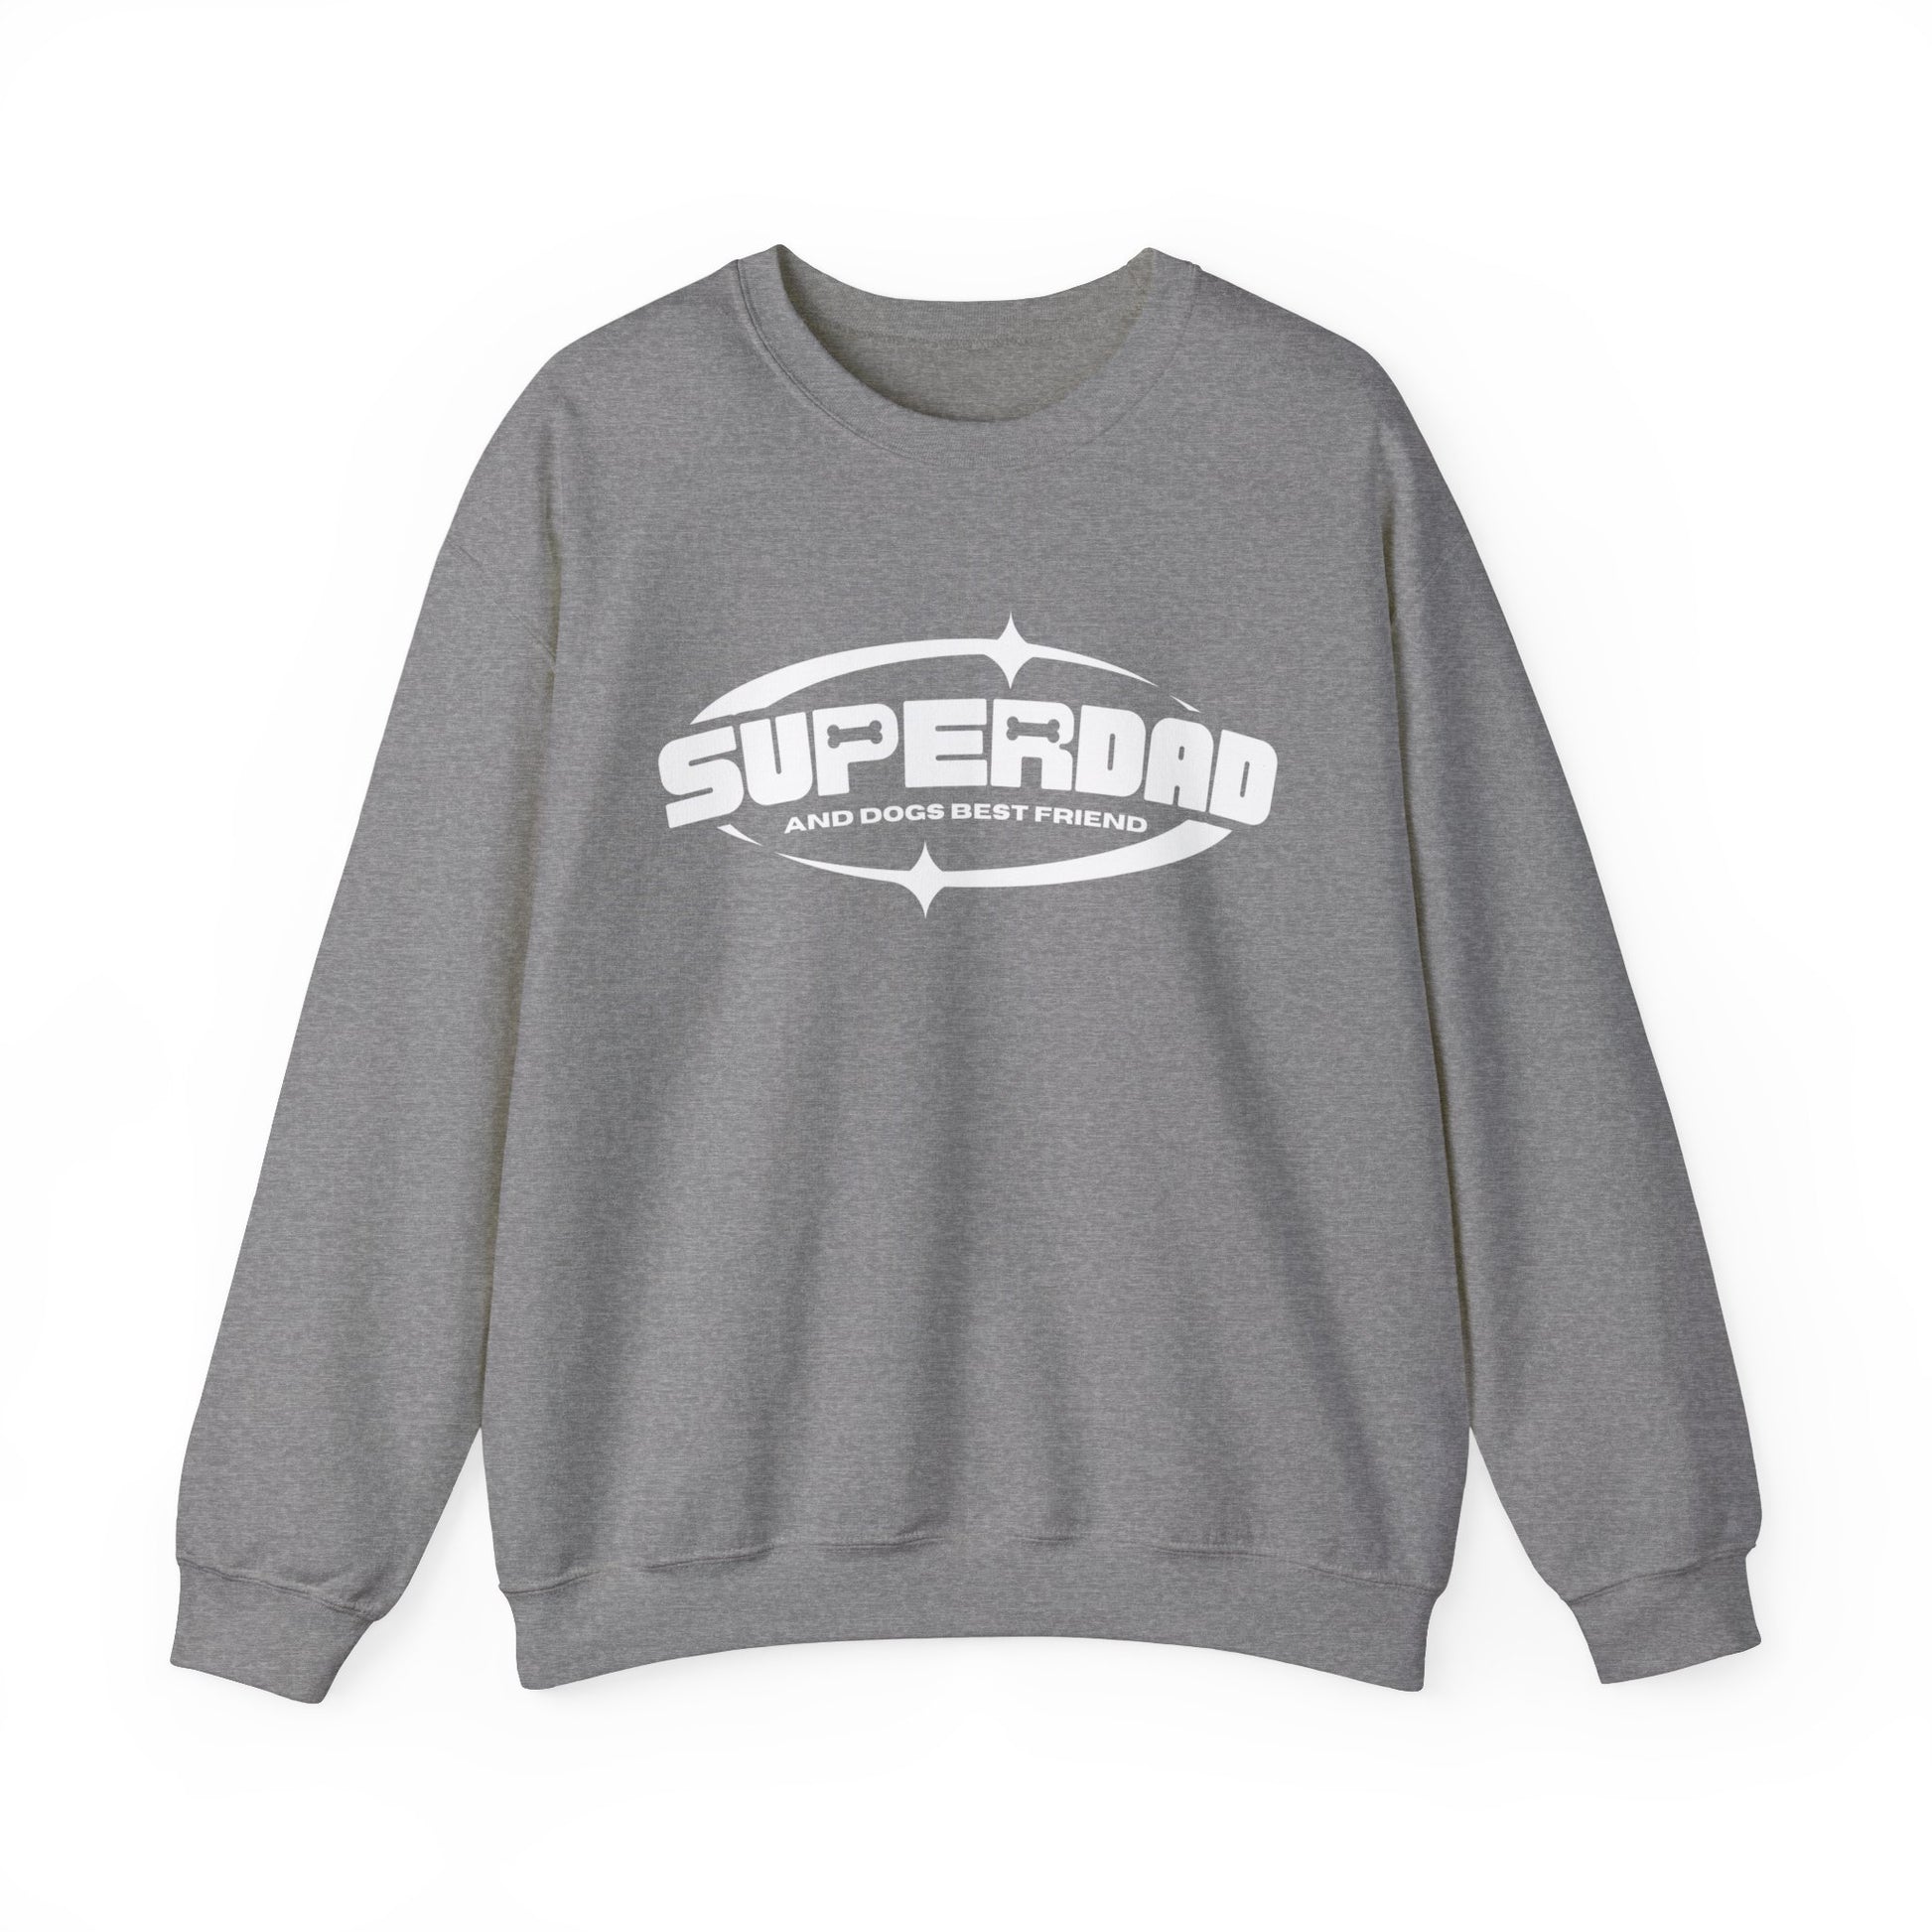 Showcasing a sport grey Dogs Pure Love unisex sweatshirt, featuring the 'Superdad' print, against a white backdrop.